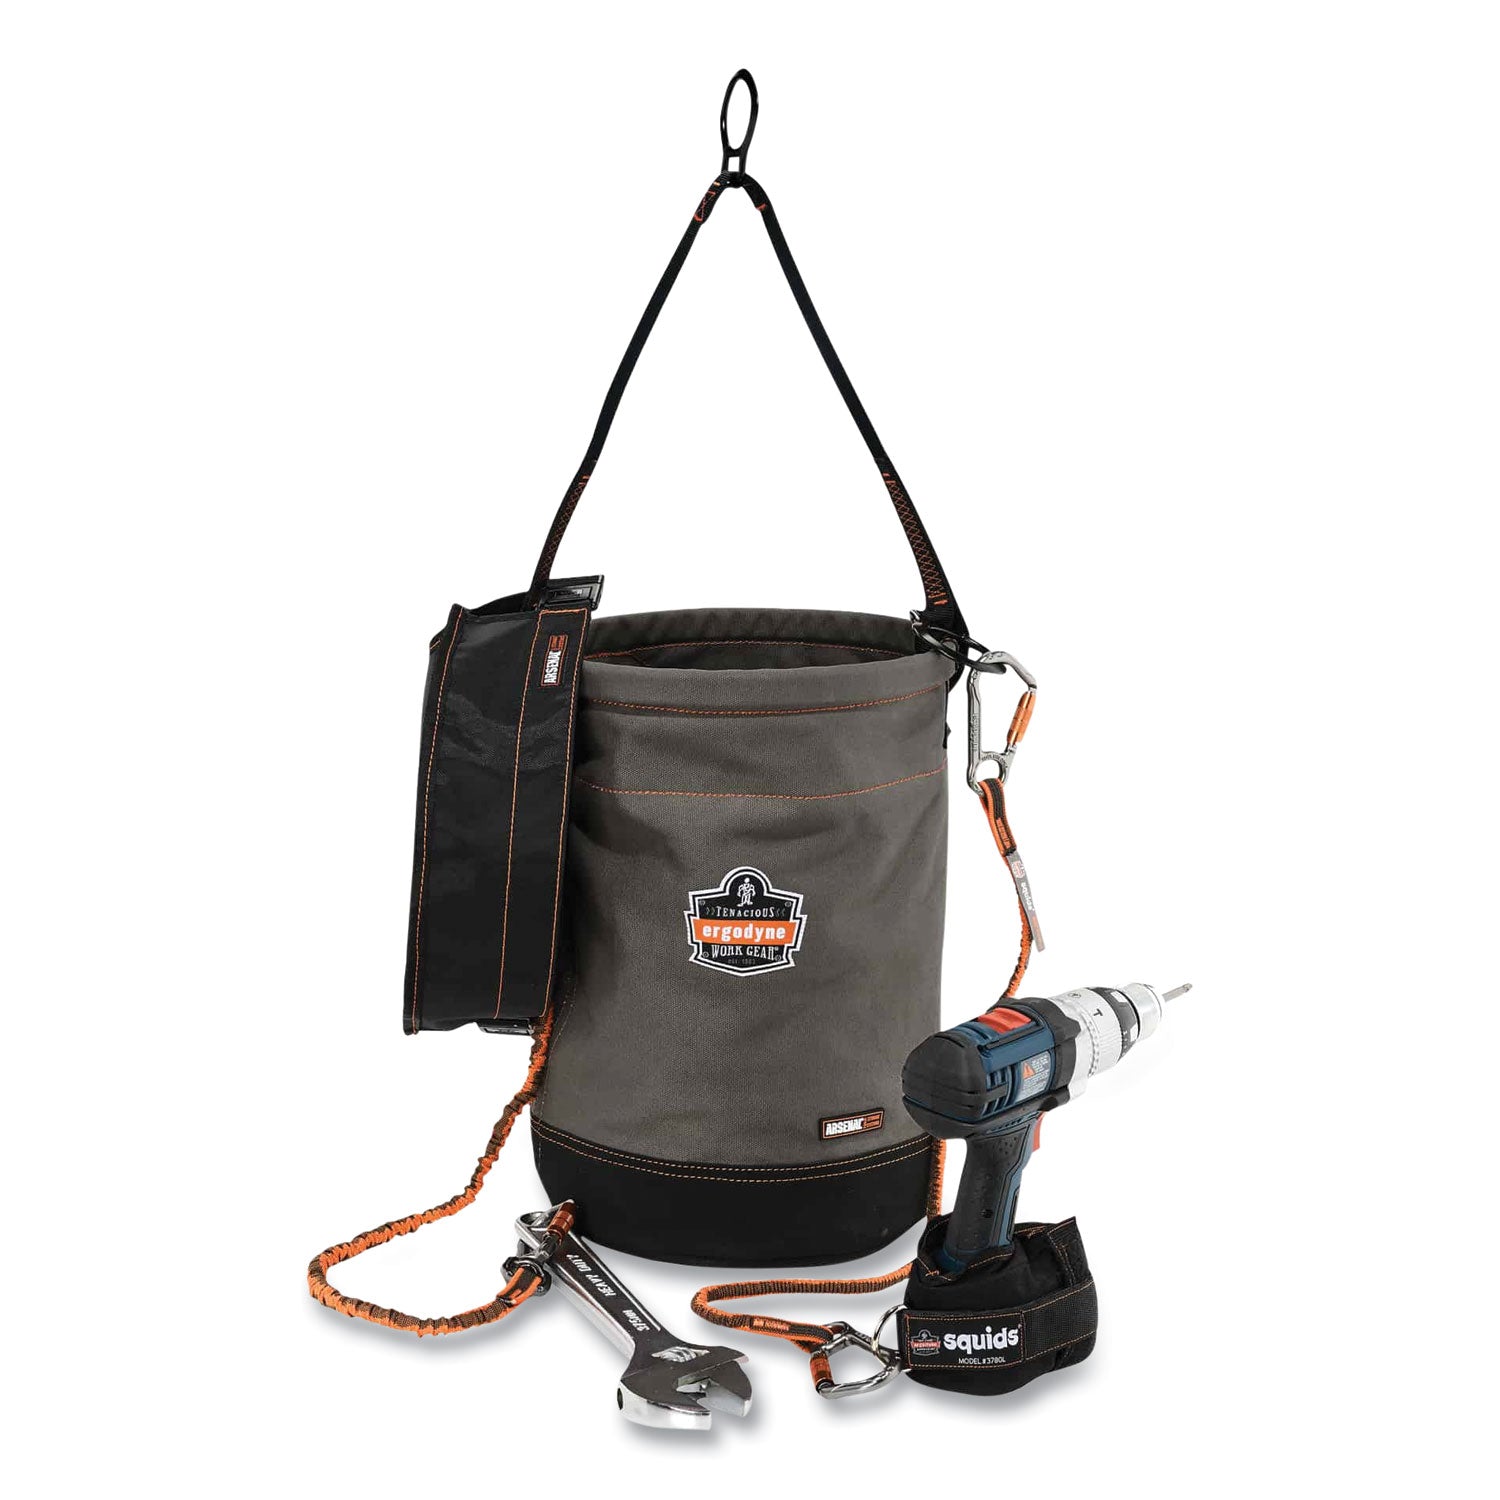 arsenal-5960t-canvas-hoist-bucket-and-top-with-d-rings-125-x-125-x-17-gray-ships-in-1-3-business-days_ego14860 - 3